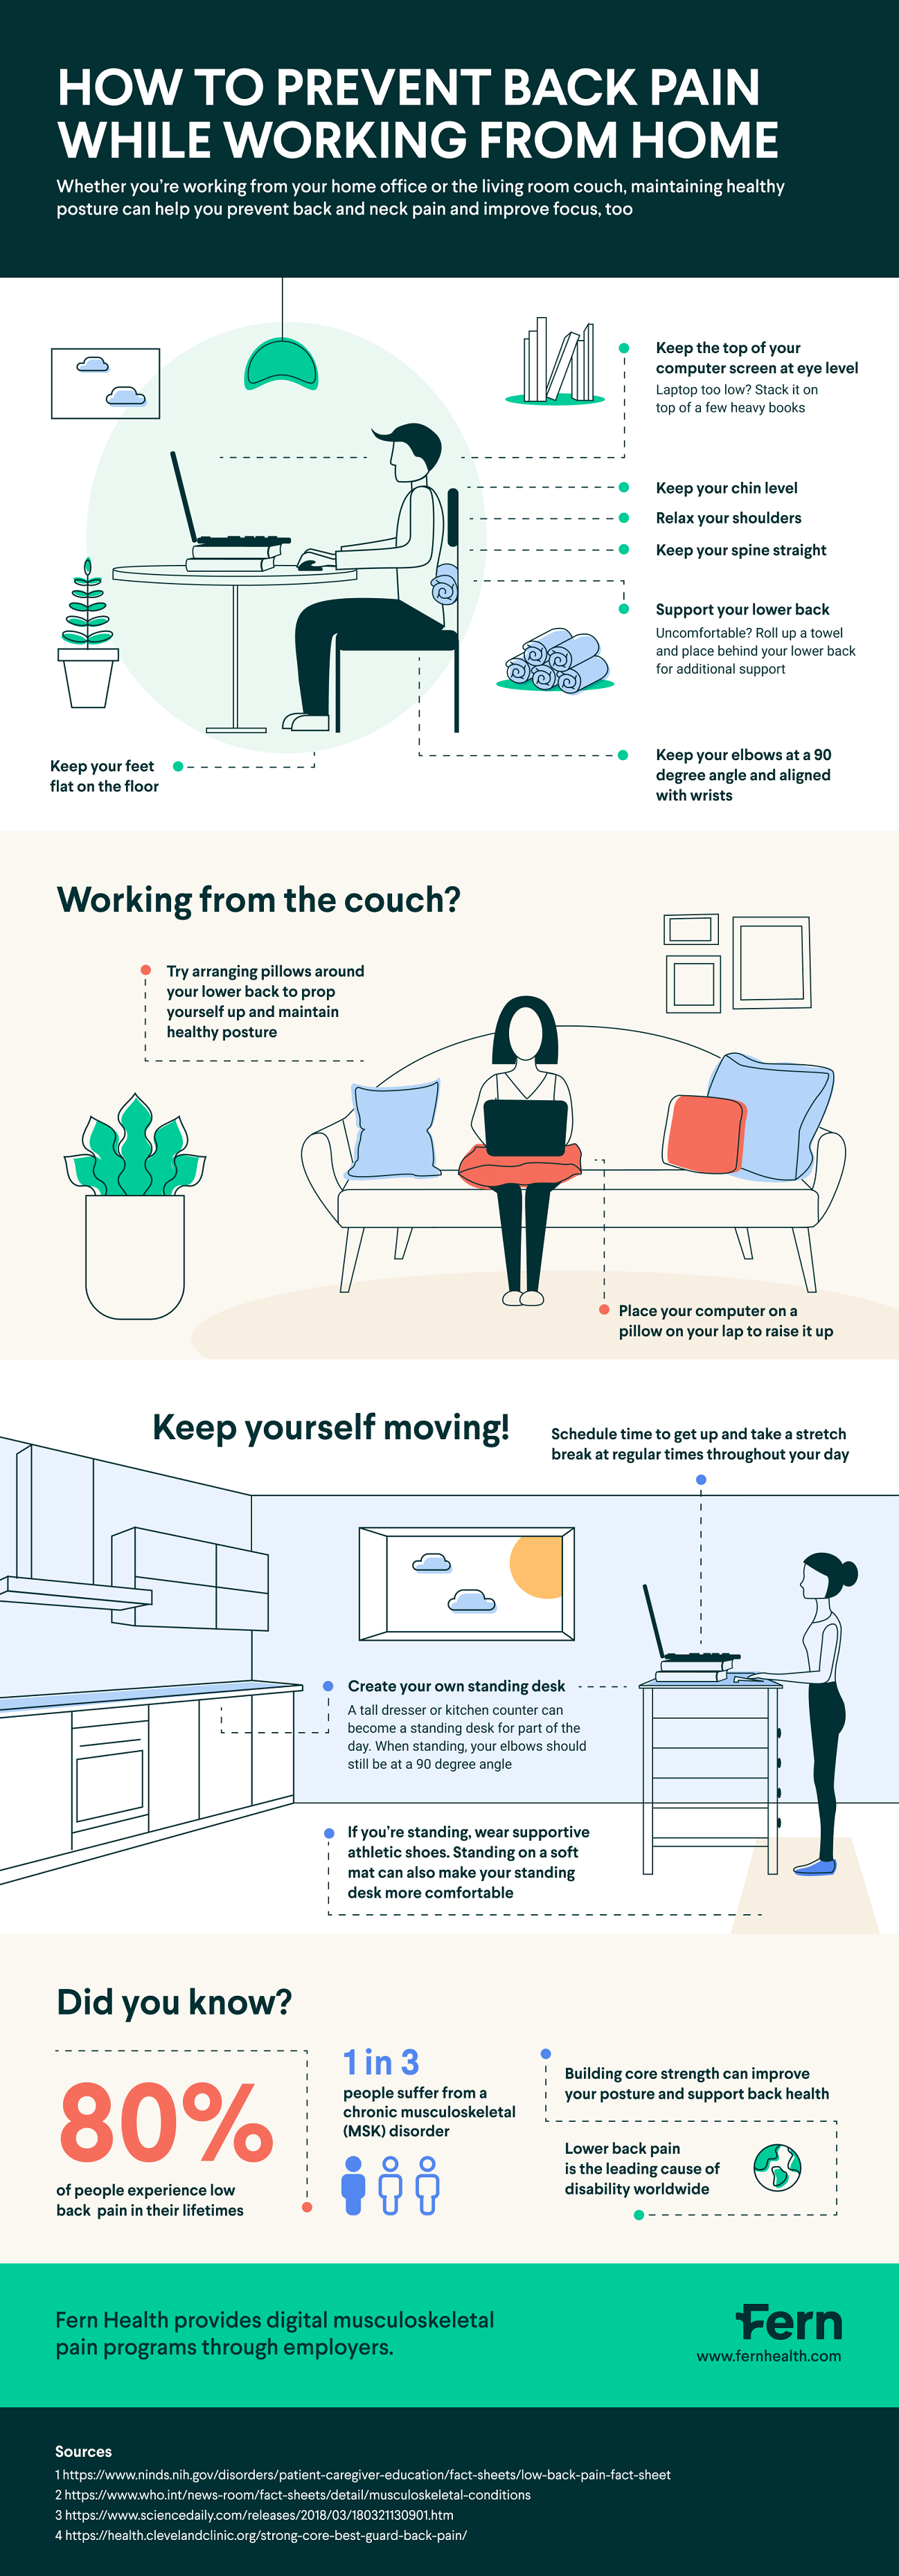 How to Prevent Back Pain While Working From Home #infographic